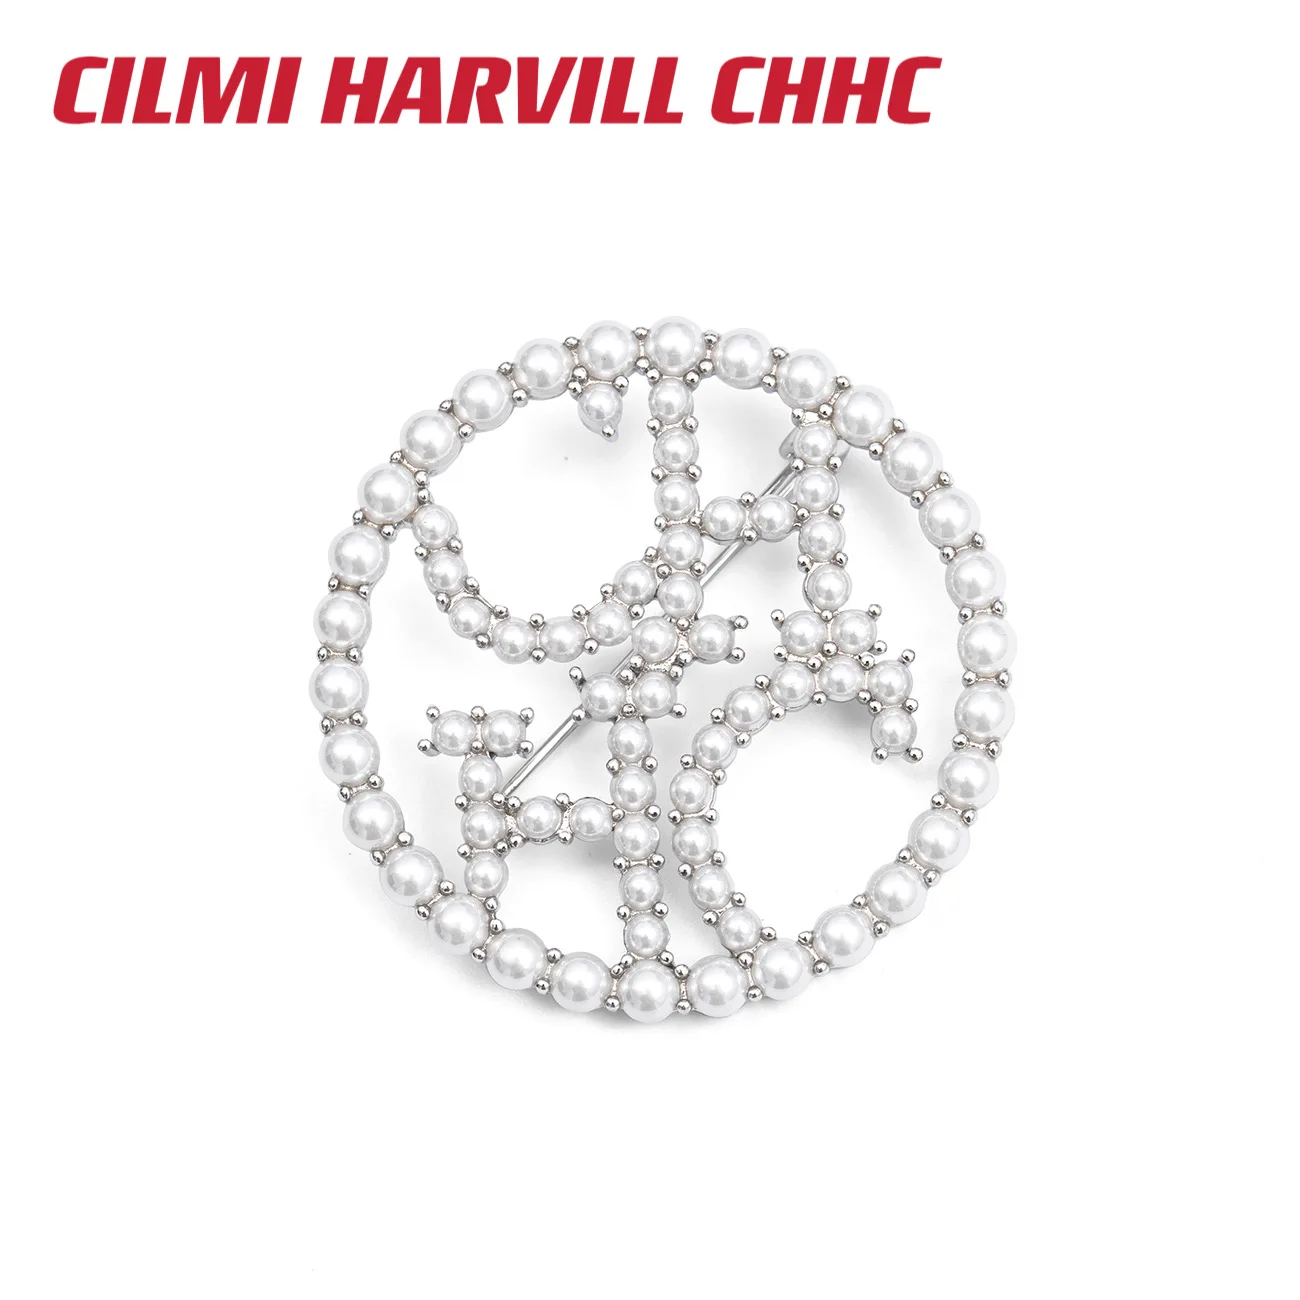 

CILMI HARVILL CHHC Women's Banquet Brooch With Circular Decoration High-end Matching Gift Box Packaging Dating Fashion